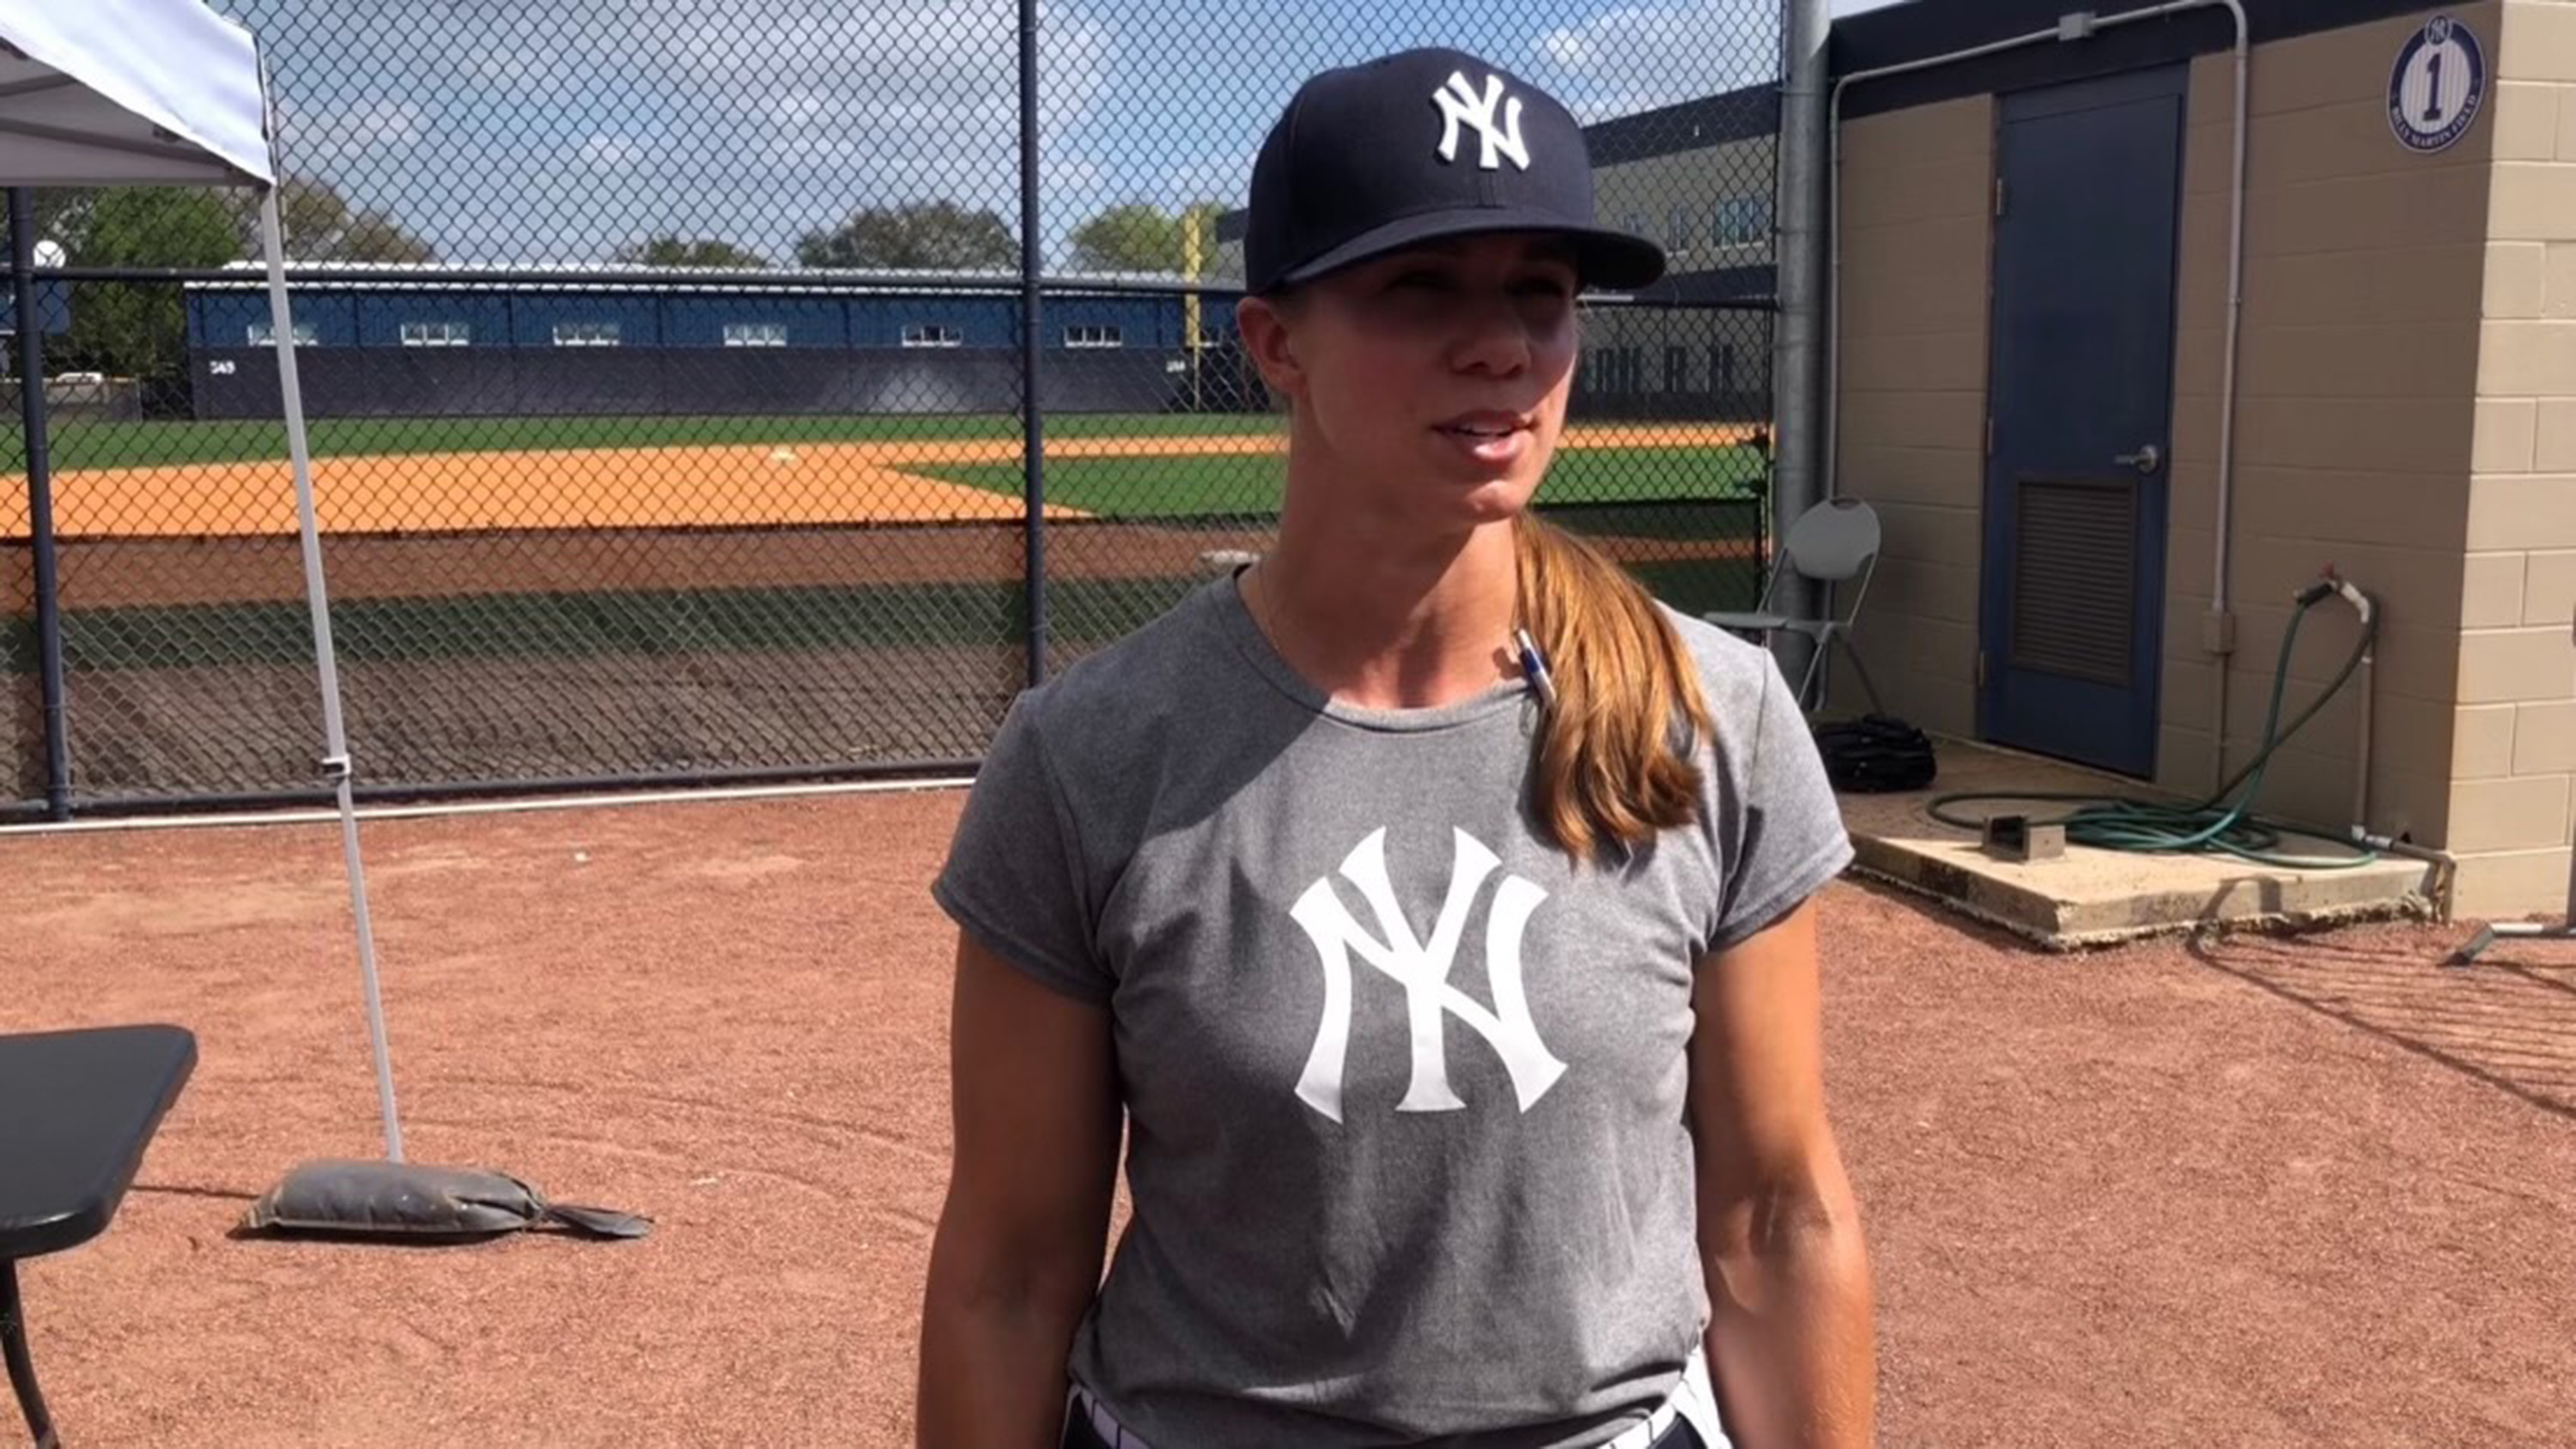 Yankees' Rachel Balkovec becomes first female manager in minor